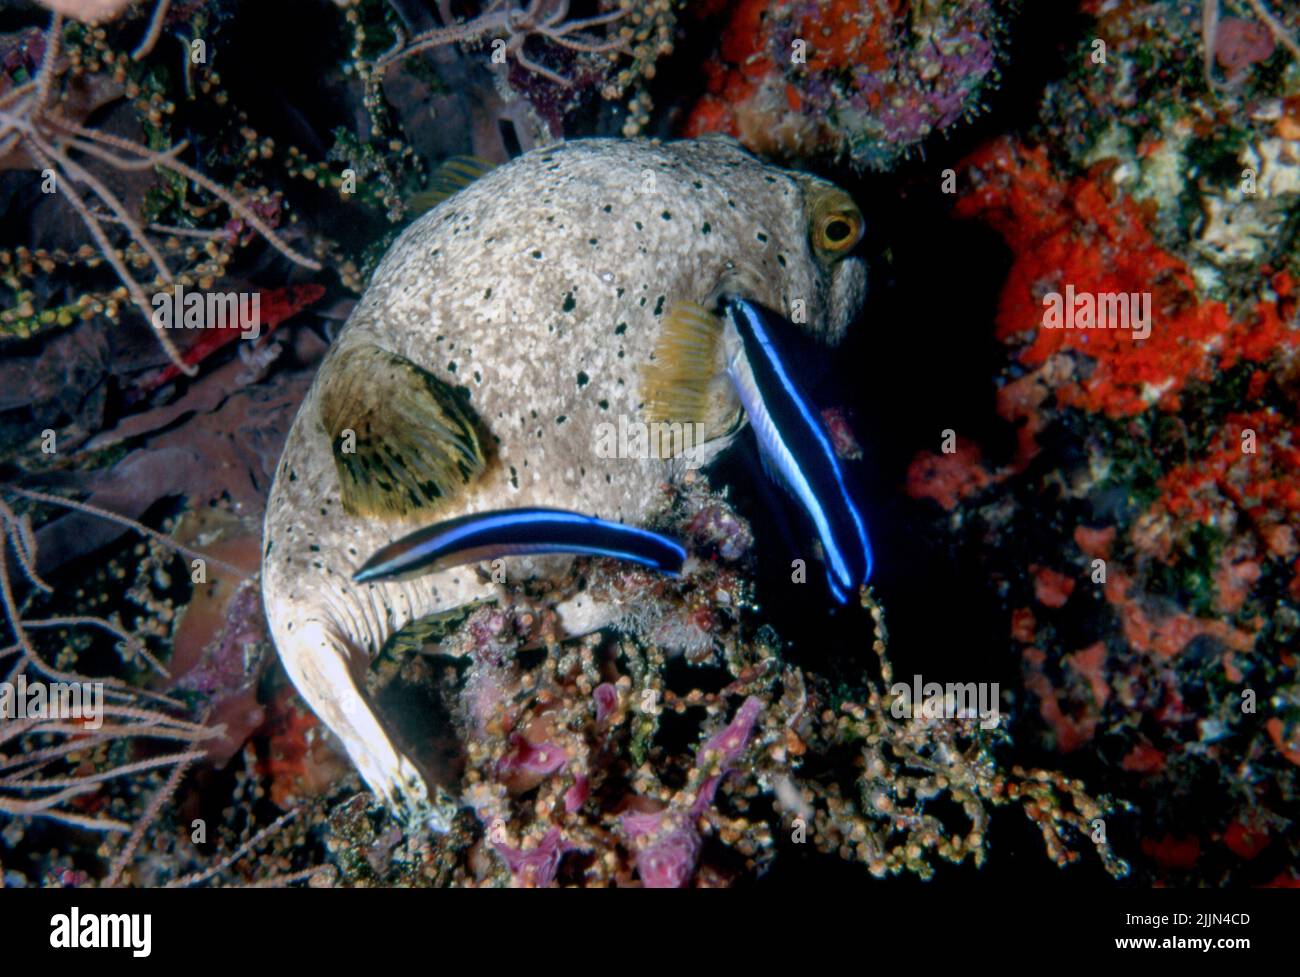 A Black-spotted Puffer (Arothron nigropunctatus) is being cleaned by two Bluestreak Cleaner Wrasse (Labroides dimidiatus) in a reef in the Maldives. Stock Photo